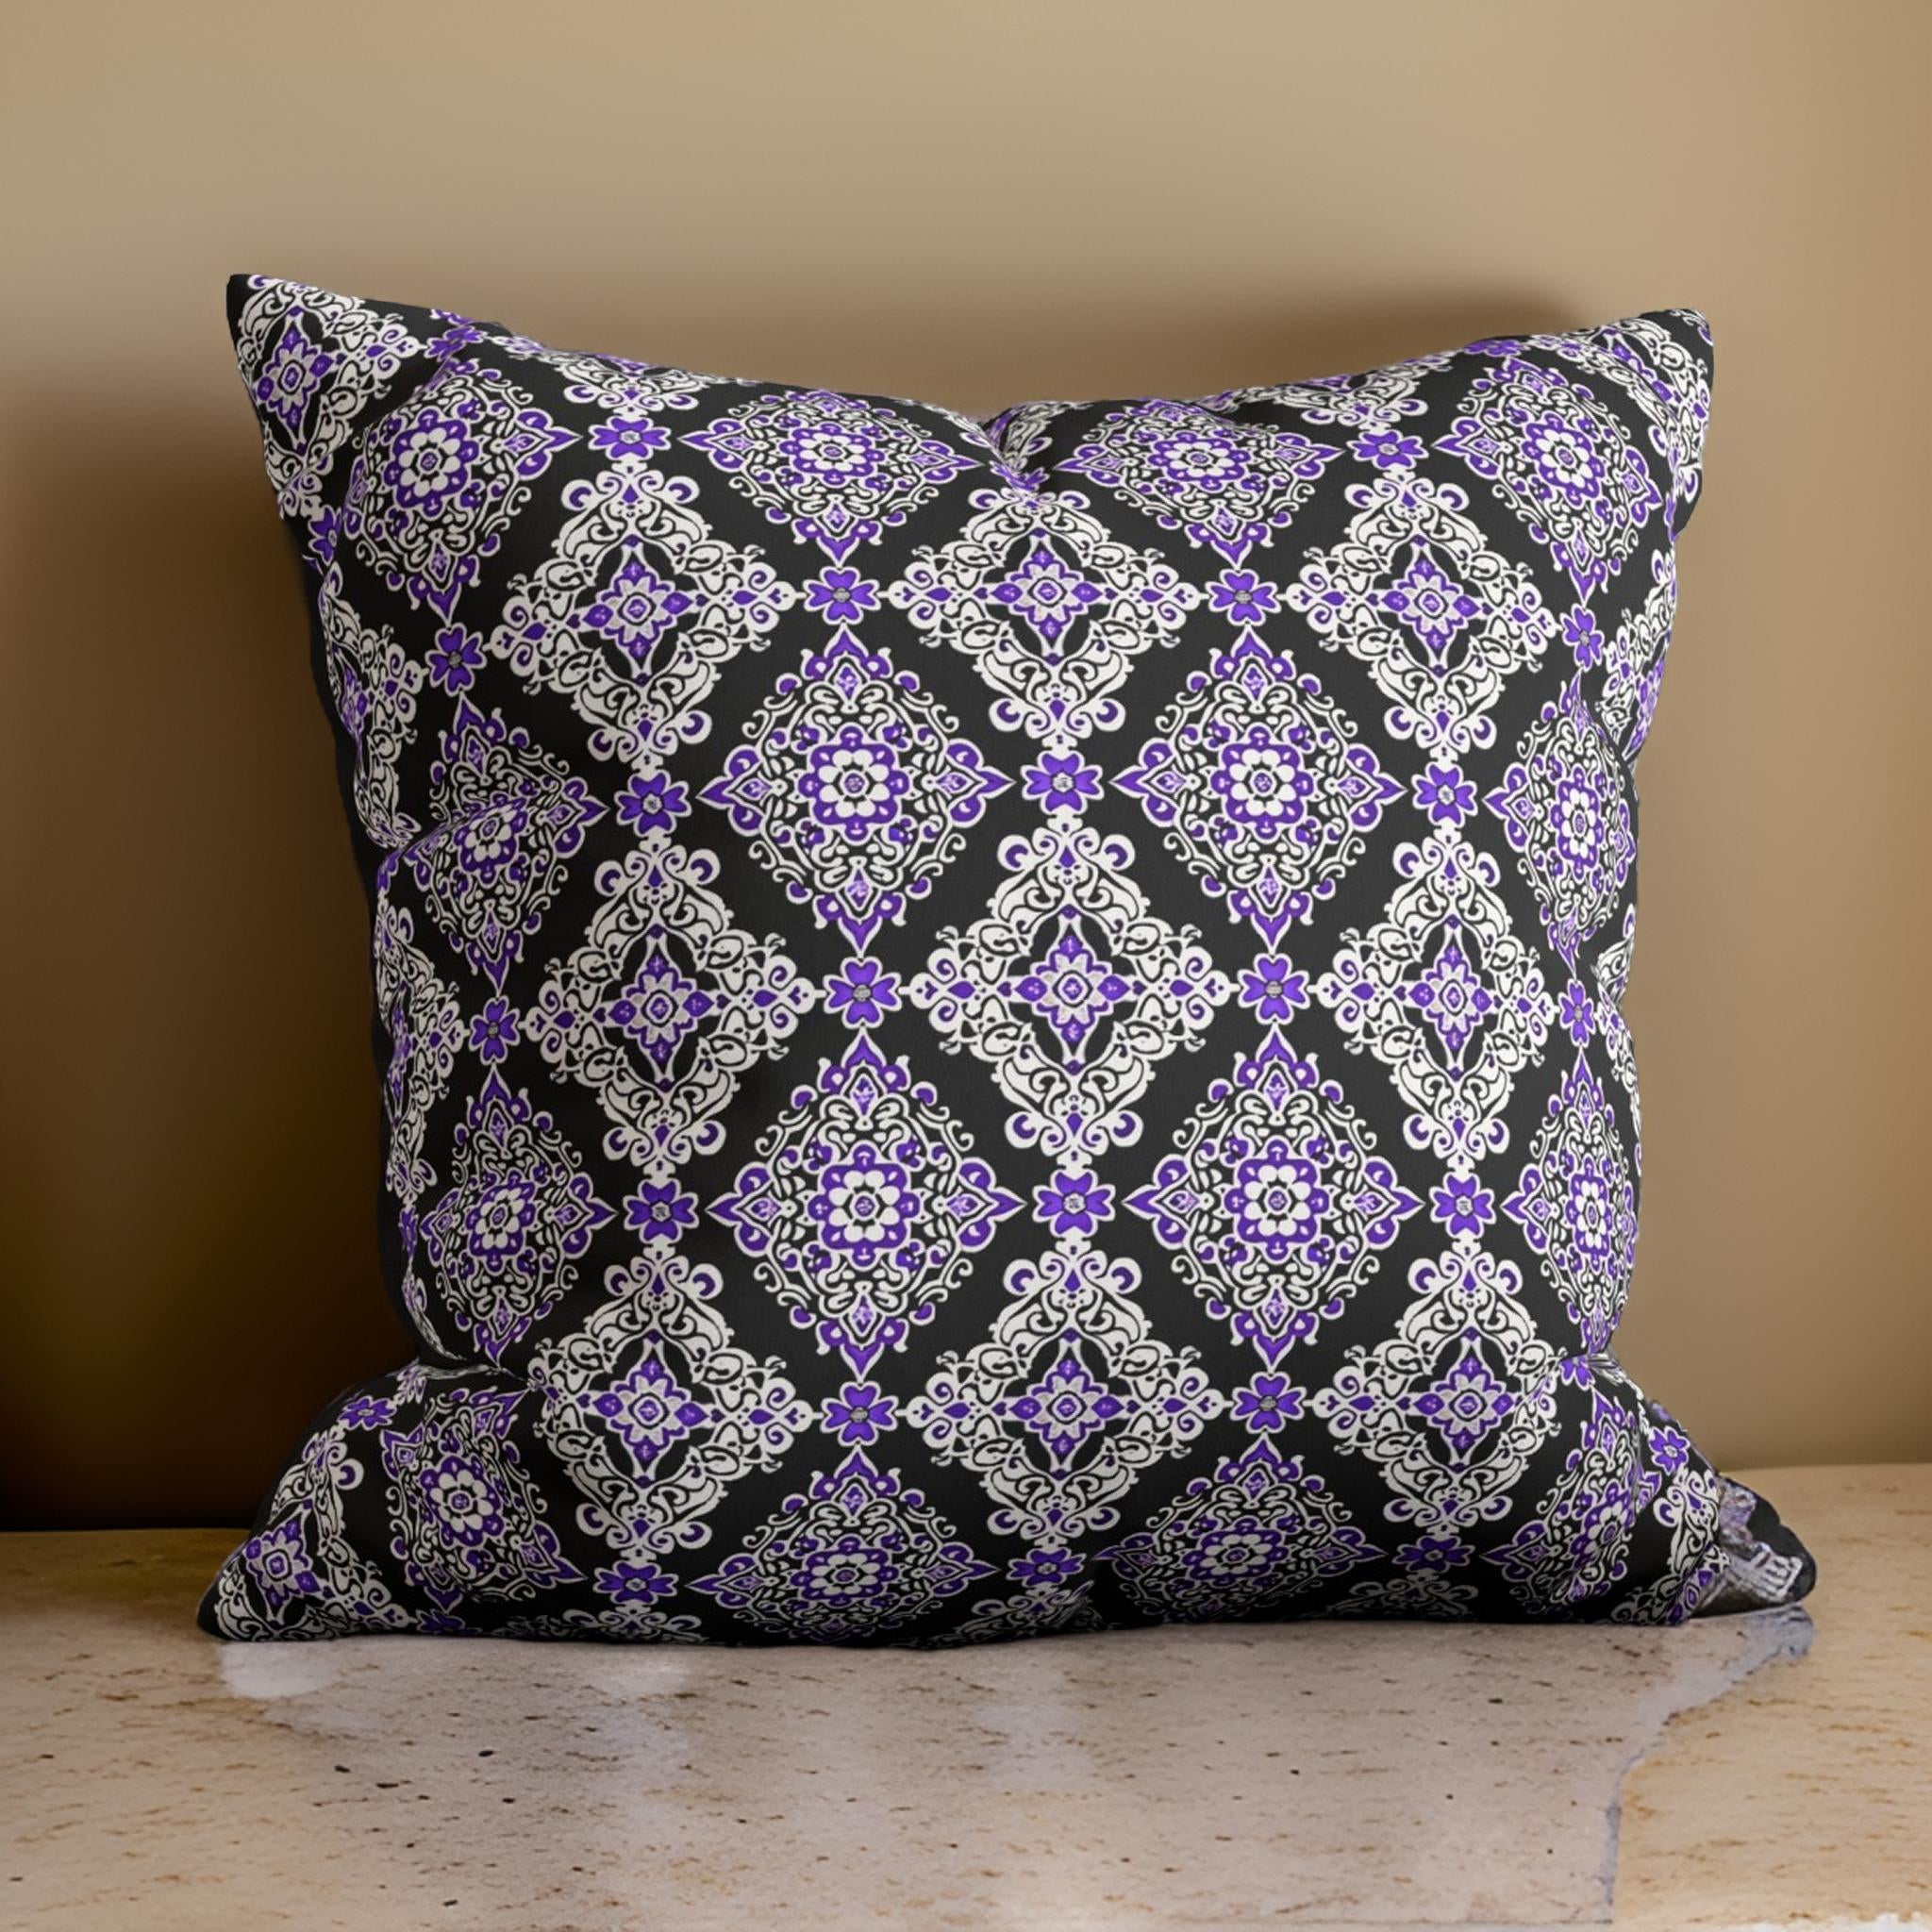 Purple and White Damask Faux Suede Throw Pillow: Midnight Majesty